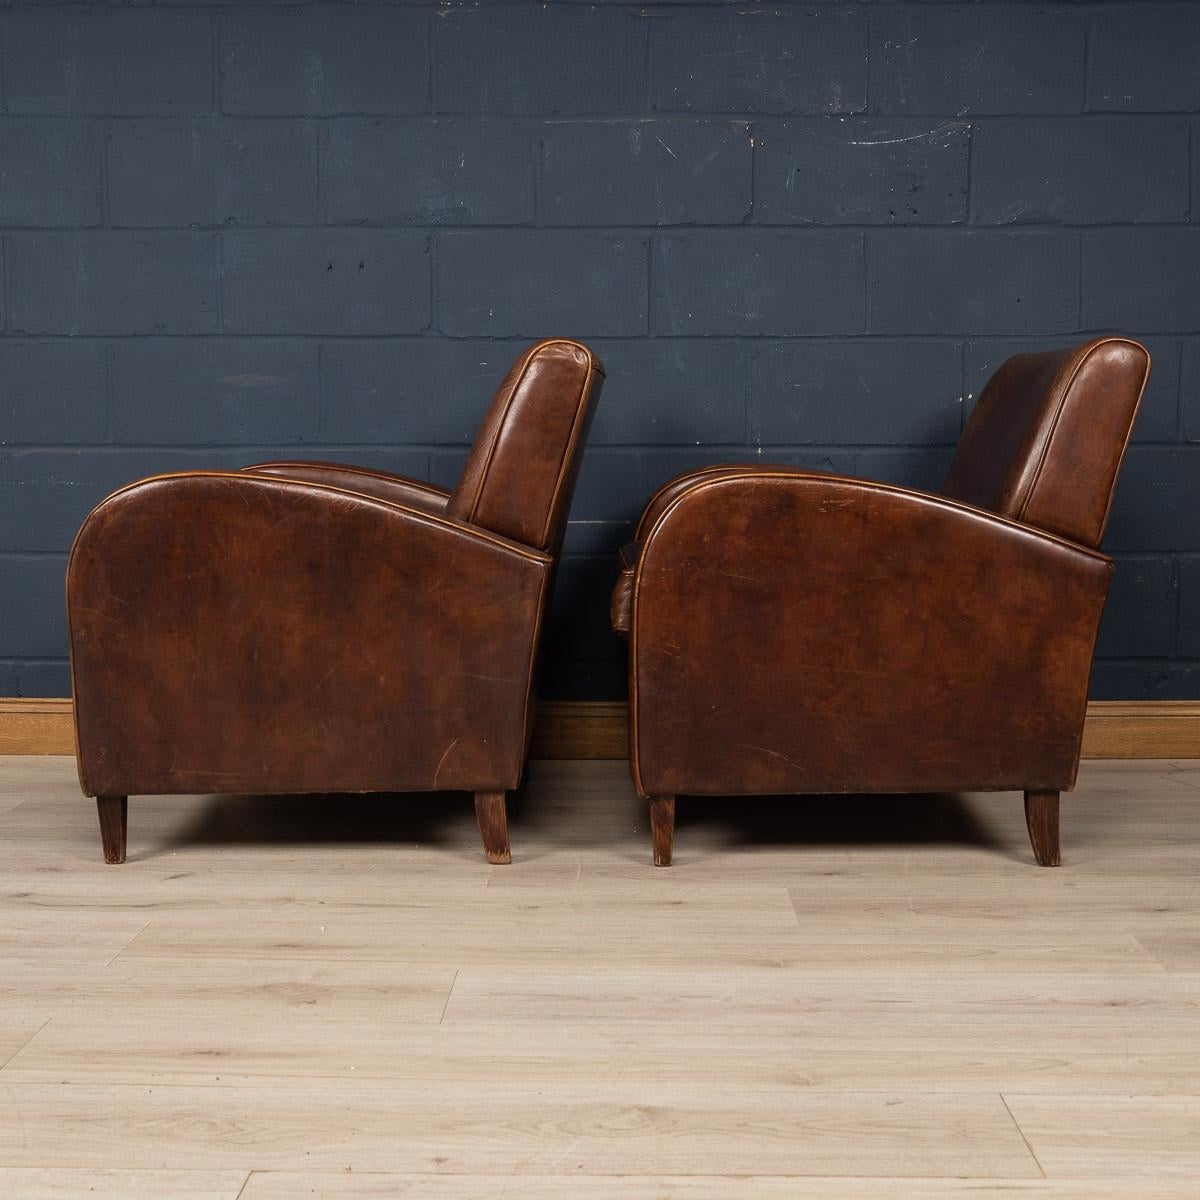 20th Century Sheepskin Leather Club Chairs, Holland In Good Condition In Royal Tunbridge Wells, Kent